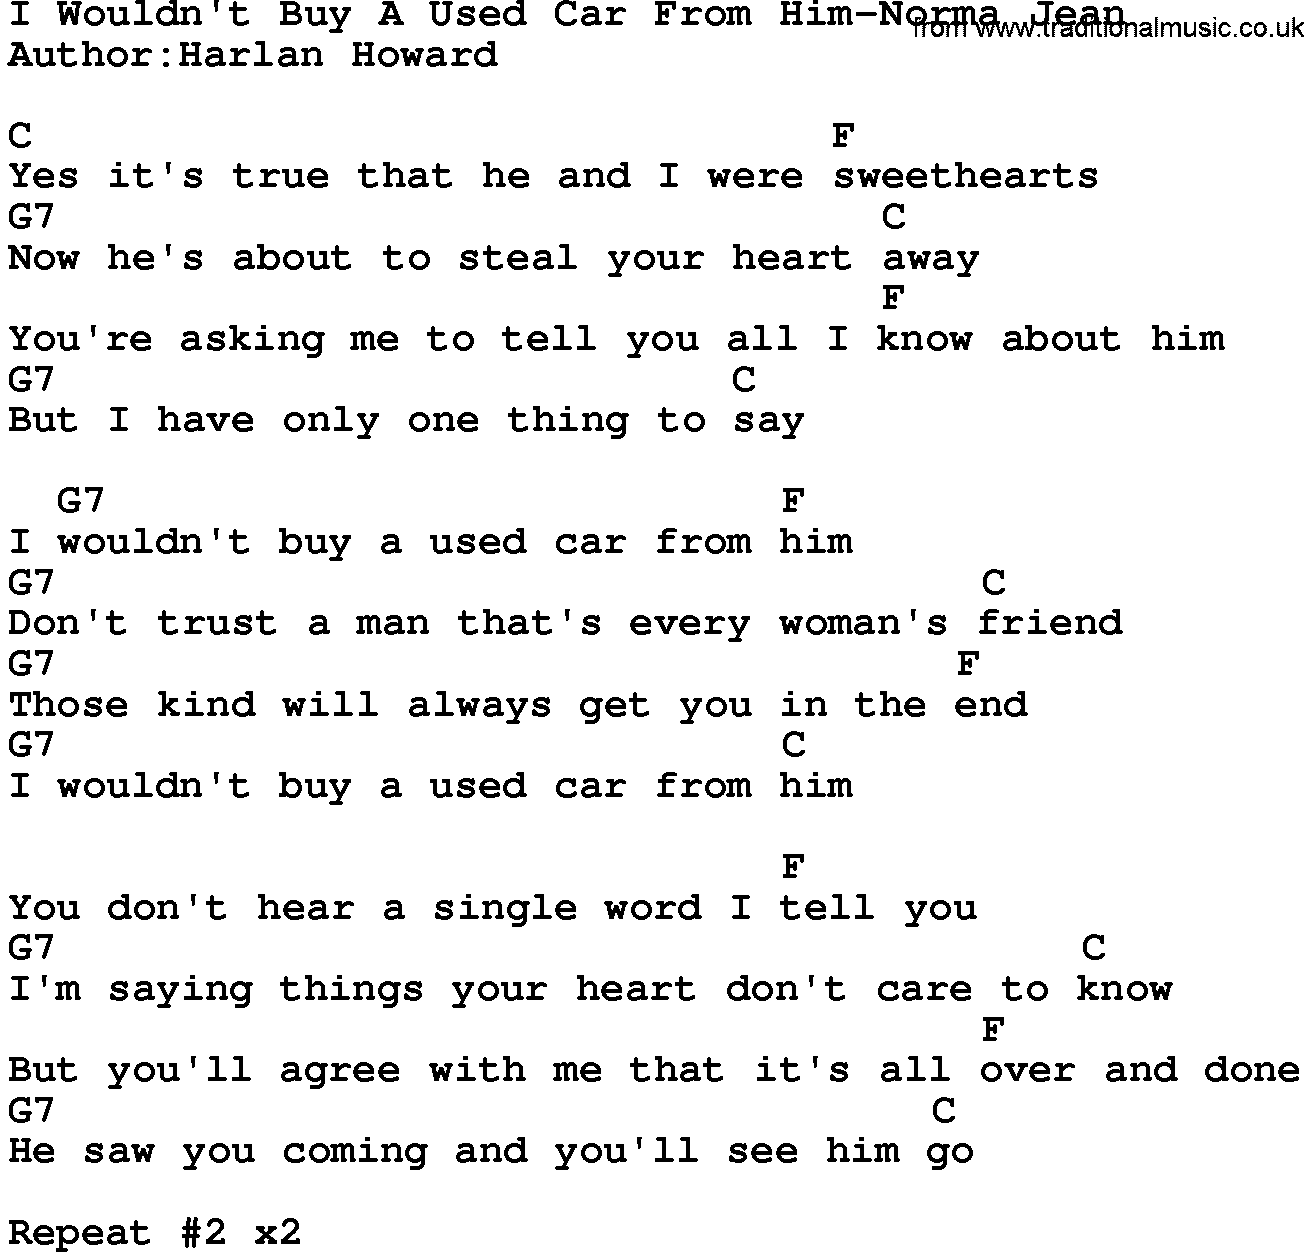 Country music song: I Wouldn't Buy A Used Car From Him-Norma Jean lyrics and chords